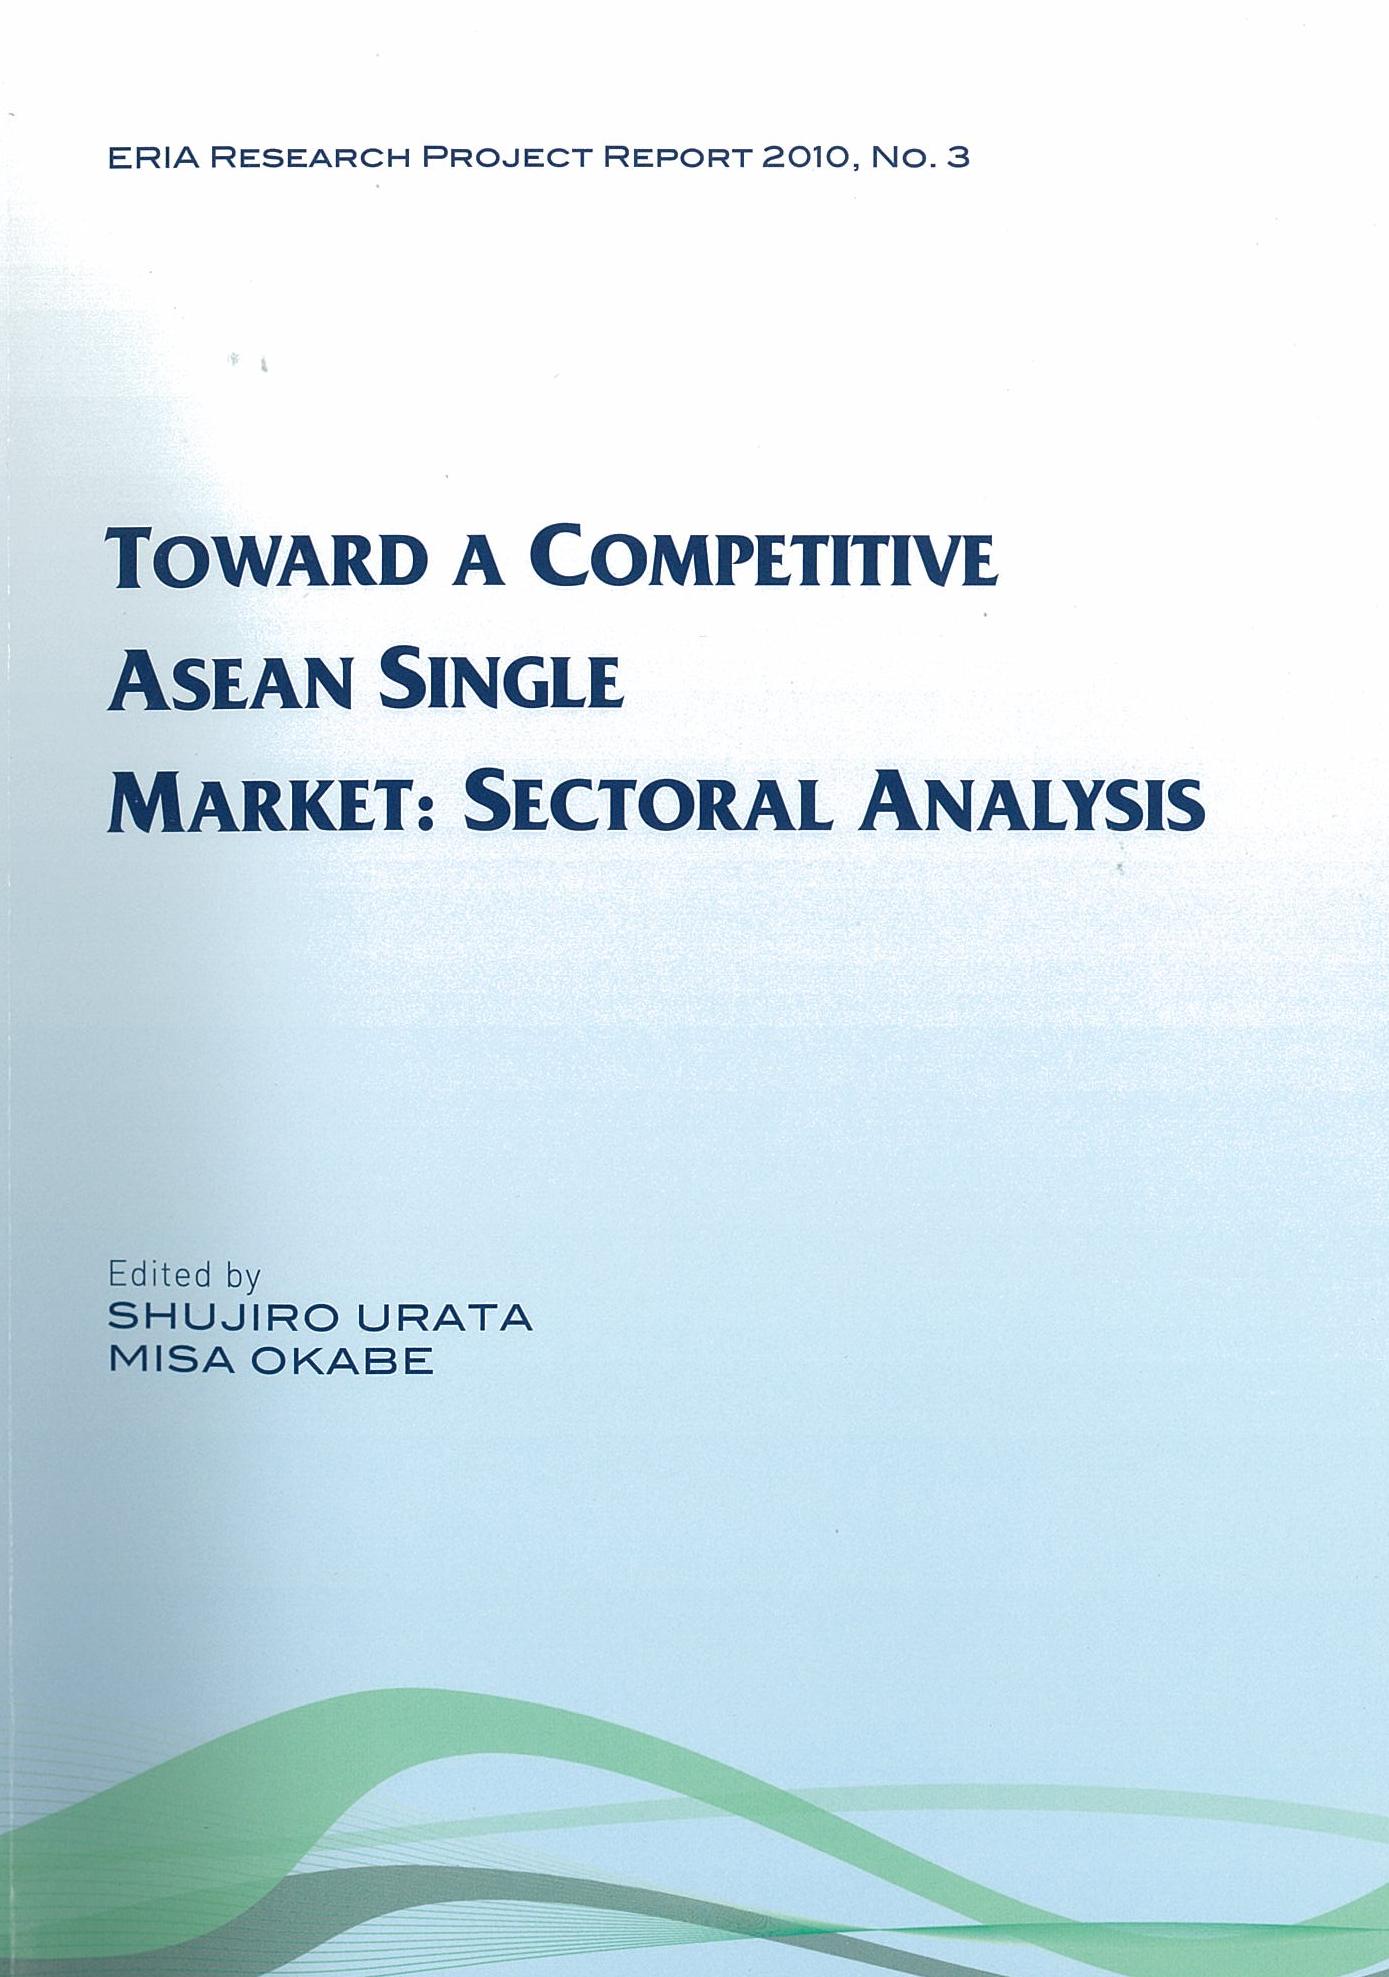 Towards a Competitive ASEAN Single Market : Sectoral Analysis